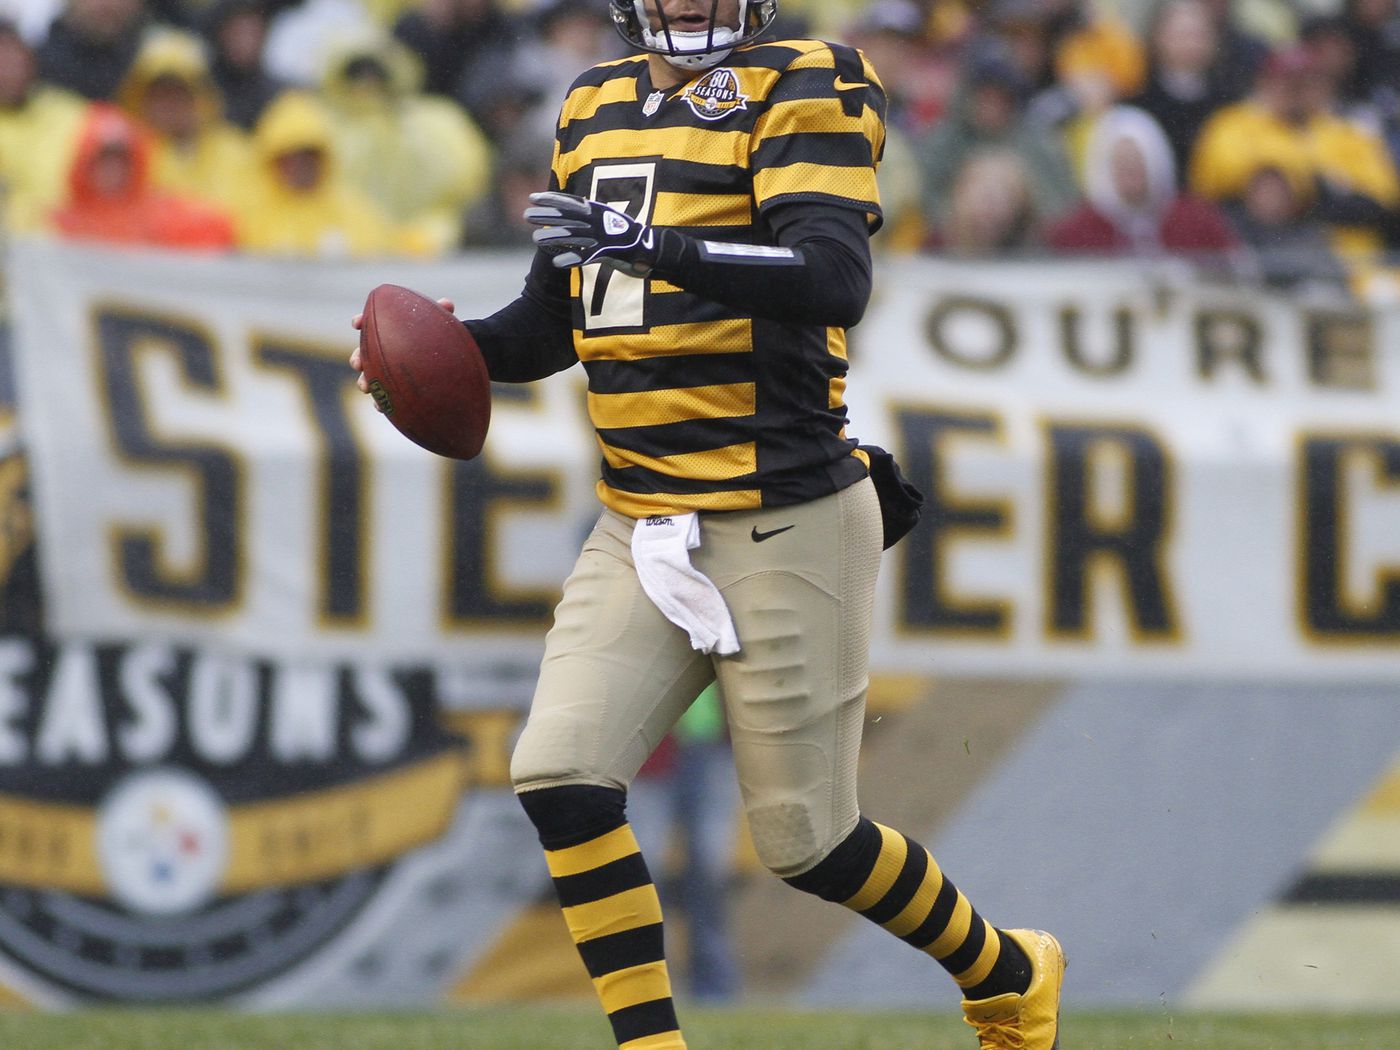 The Steelers are unveiling new throwback uniforms but what will